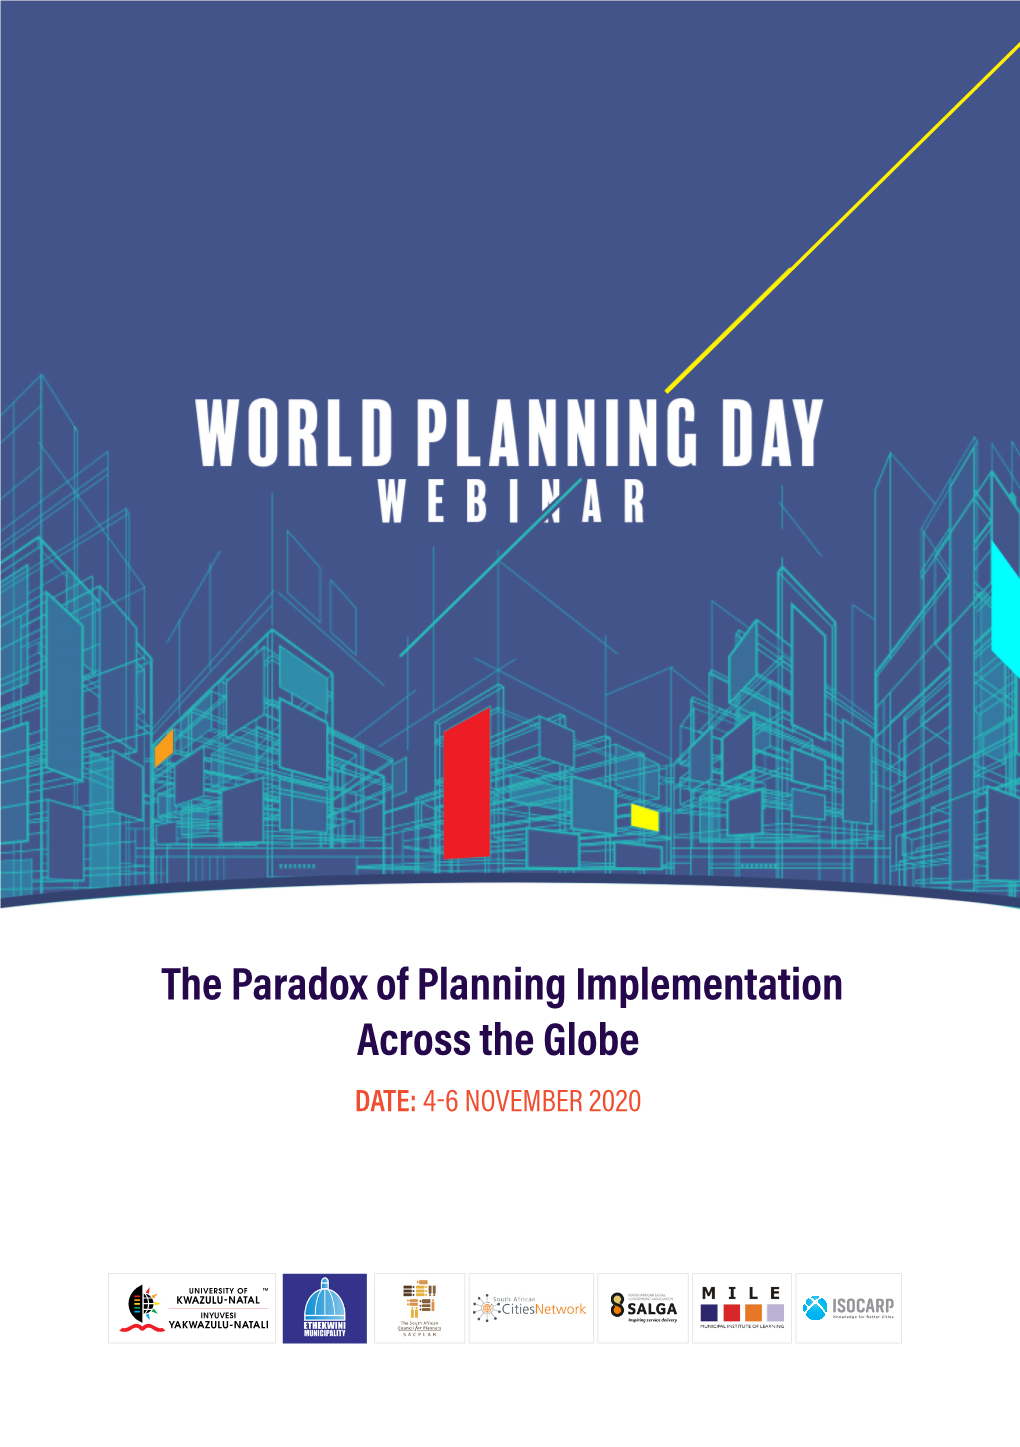 The Paradox of Planning Implementation Across the Globe